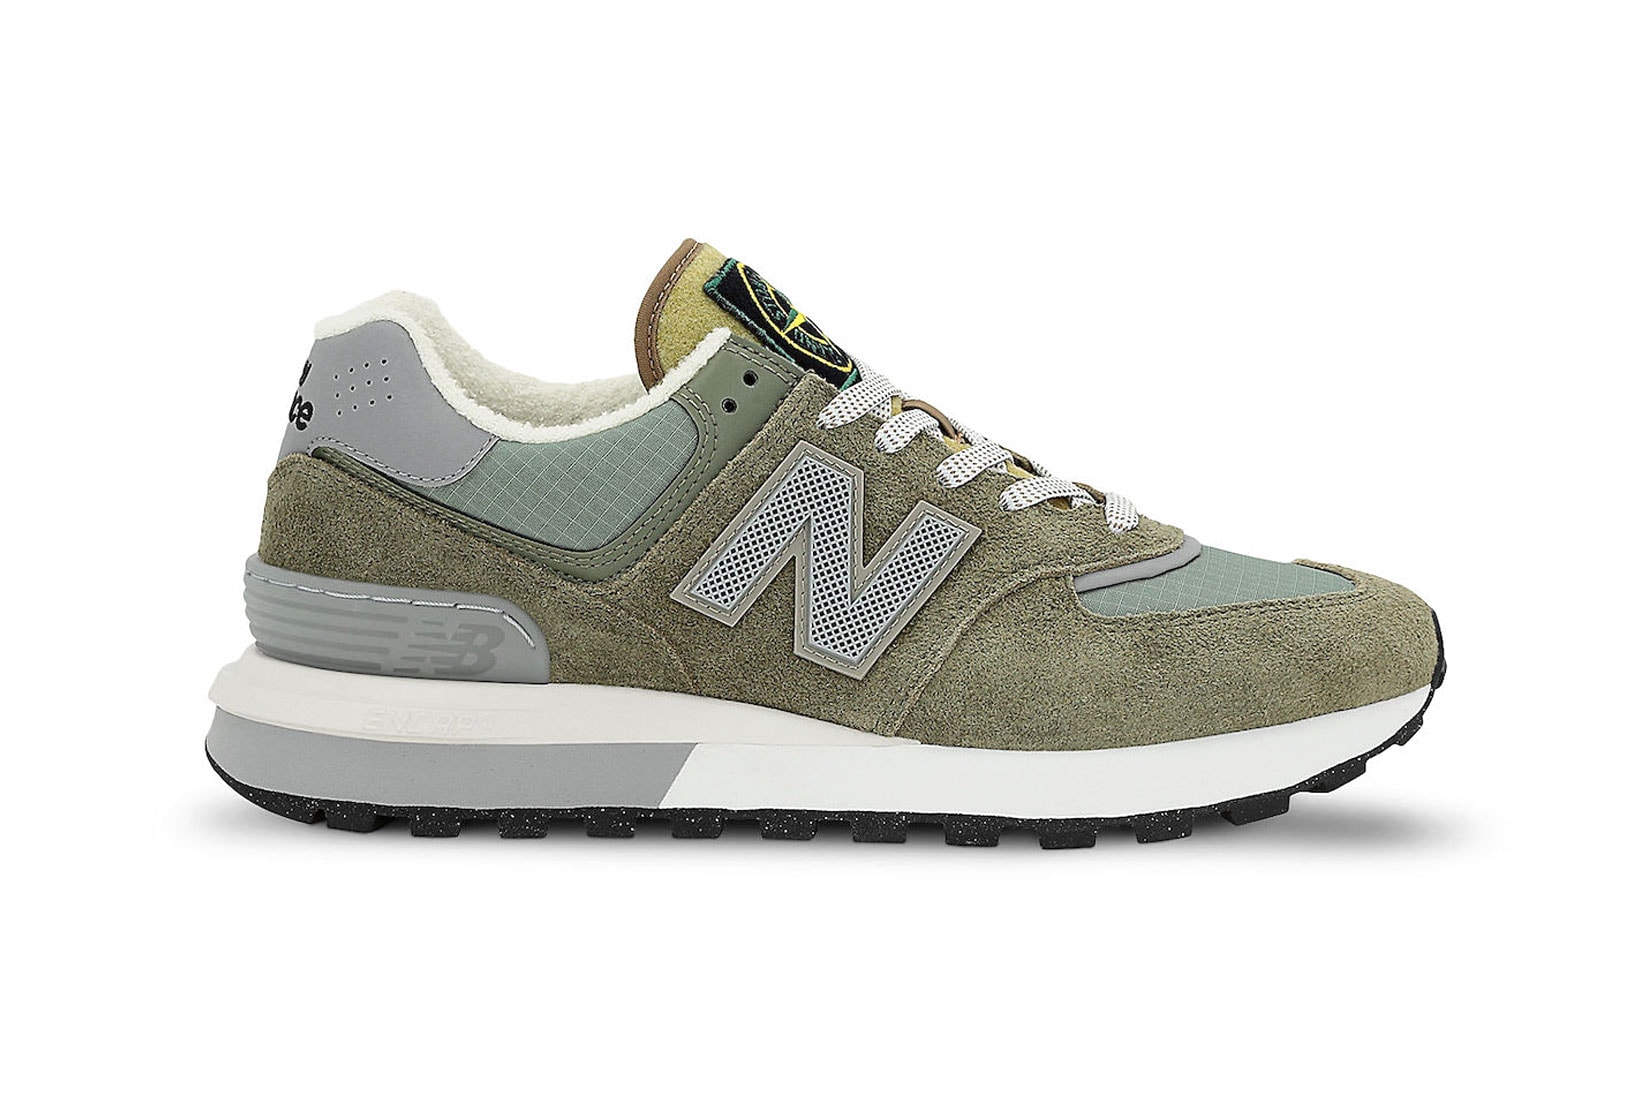 Stone Island New Balance 574 Collaboration Images RElease Info